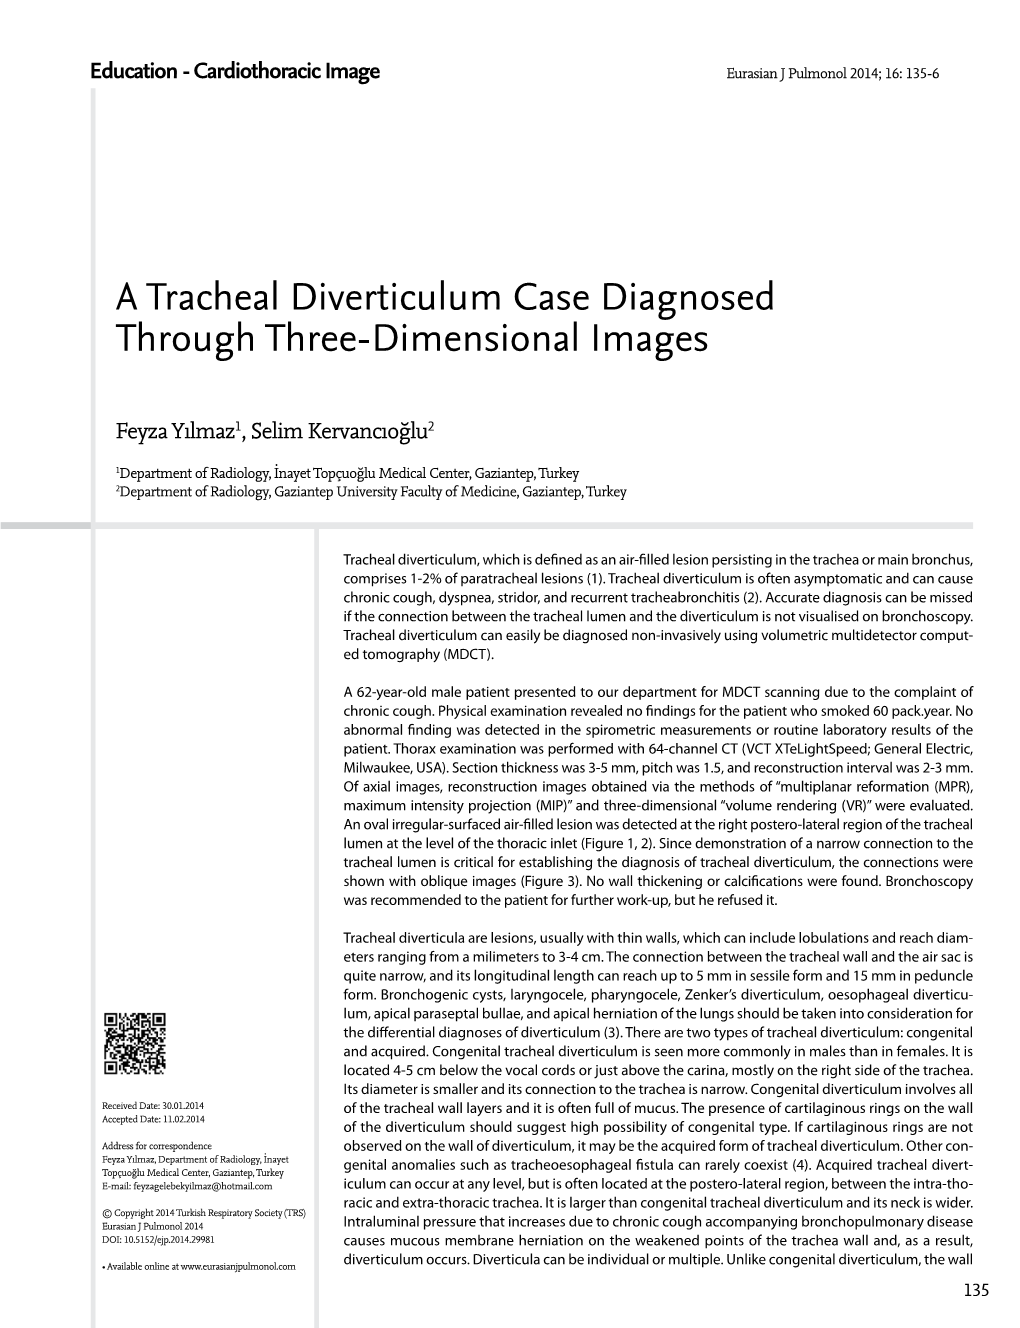 A Tracheal Diverticulum Case Diagnosed Through Three-Dimensional Images